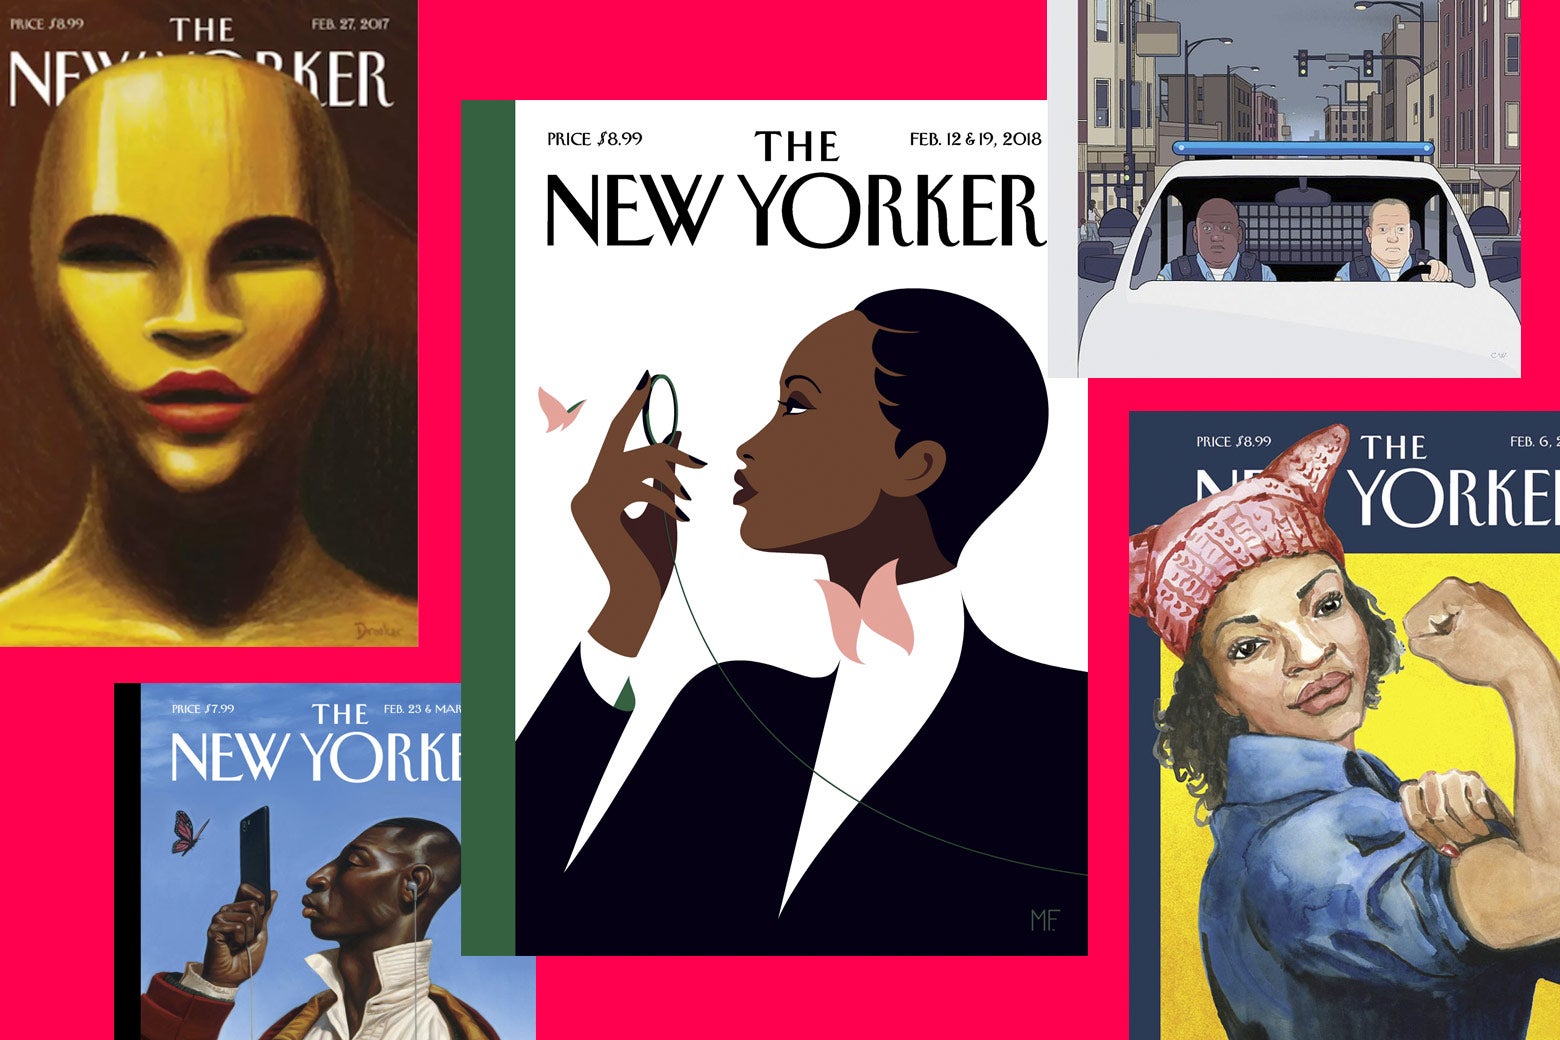 Five recent New Yorker covers featuring black people (including the one of Eustace Tilley as a black woman).